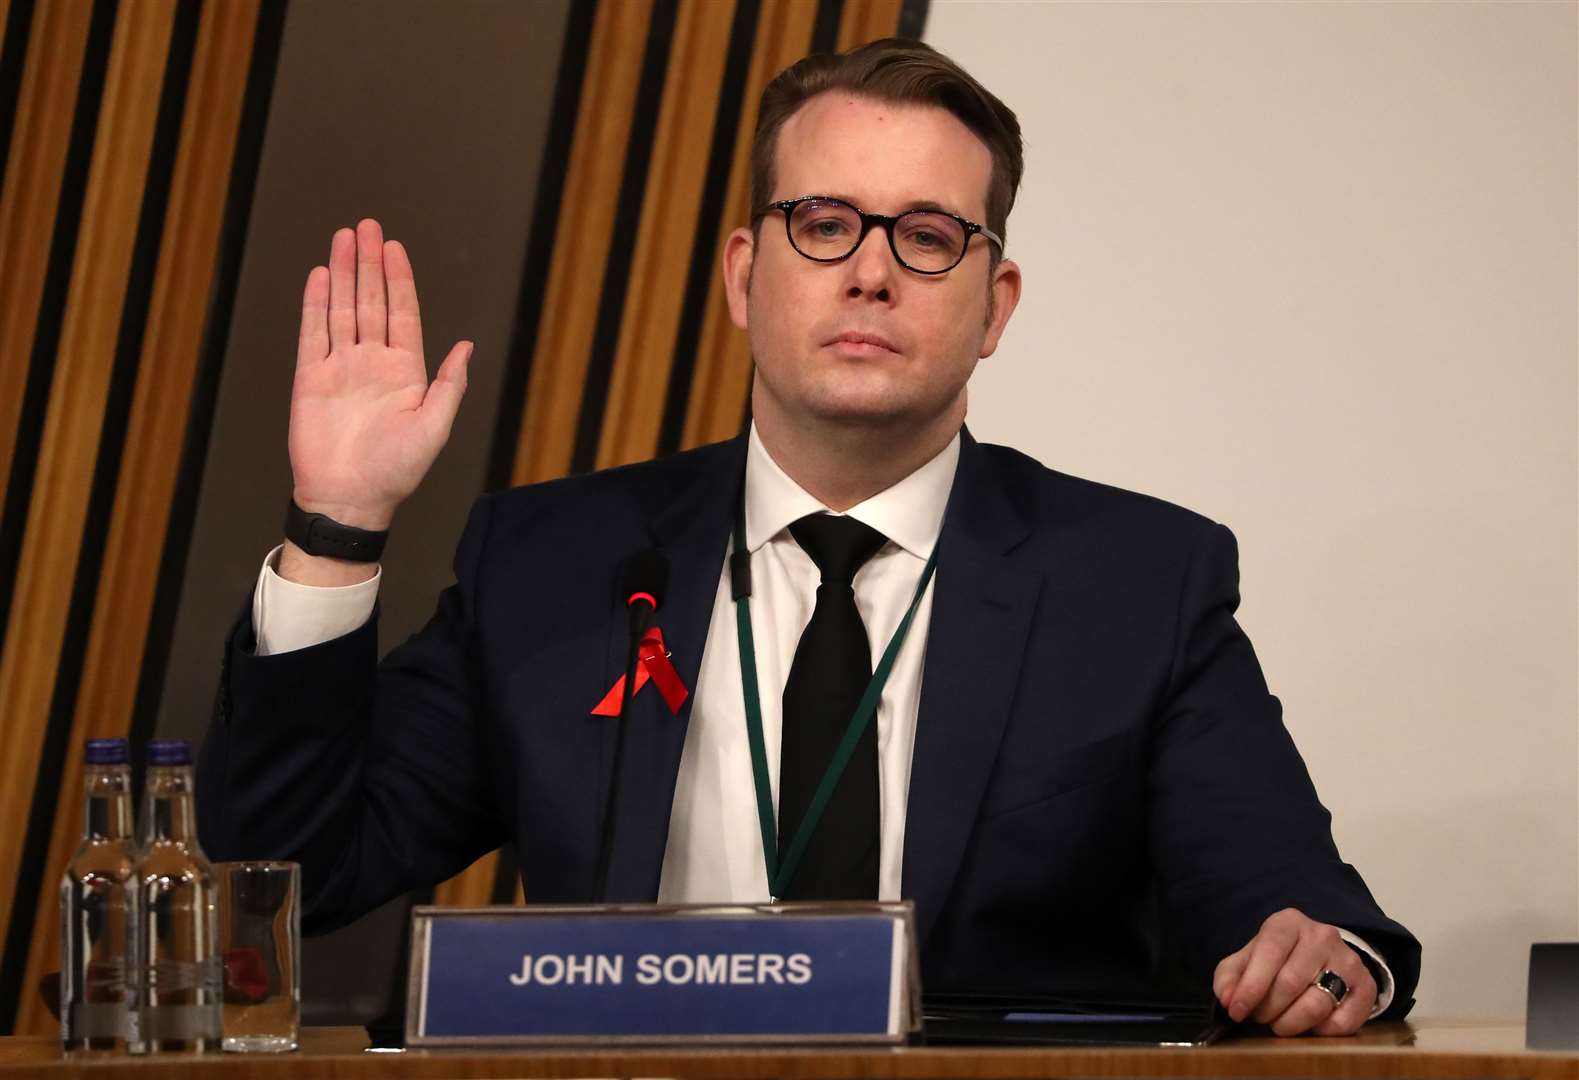 John Somers Principle Private Secretary to the First Minister gives evidence to a Scottish Parliament Harassment committee, at Holyrood in Edinburgh, examining the handling of harassment allegations against former first minister Alex Salmond (Andrew Milligan/PA)